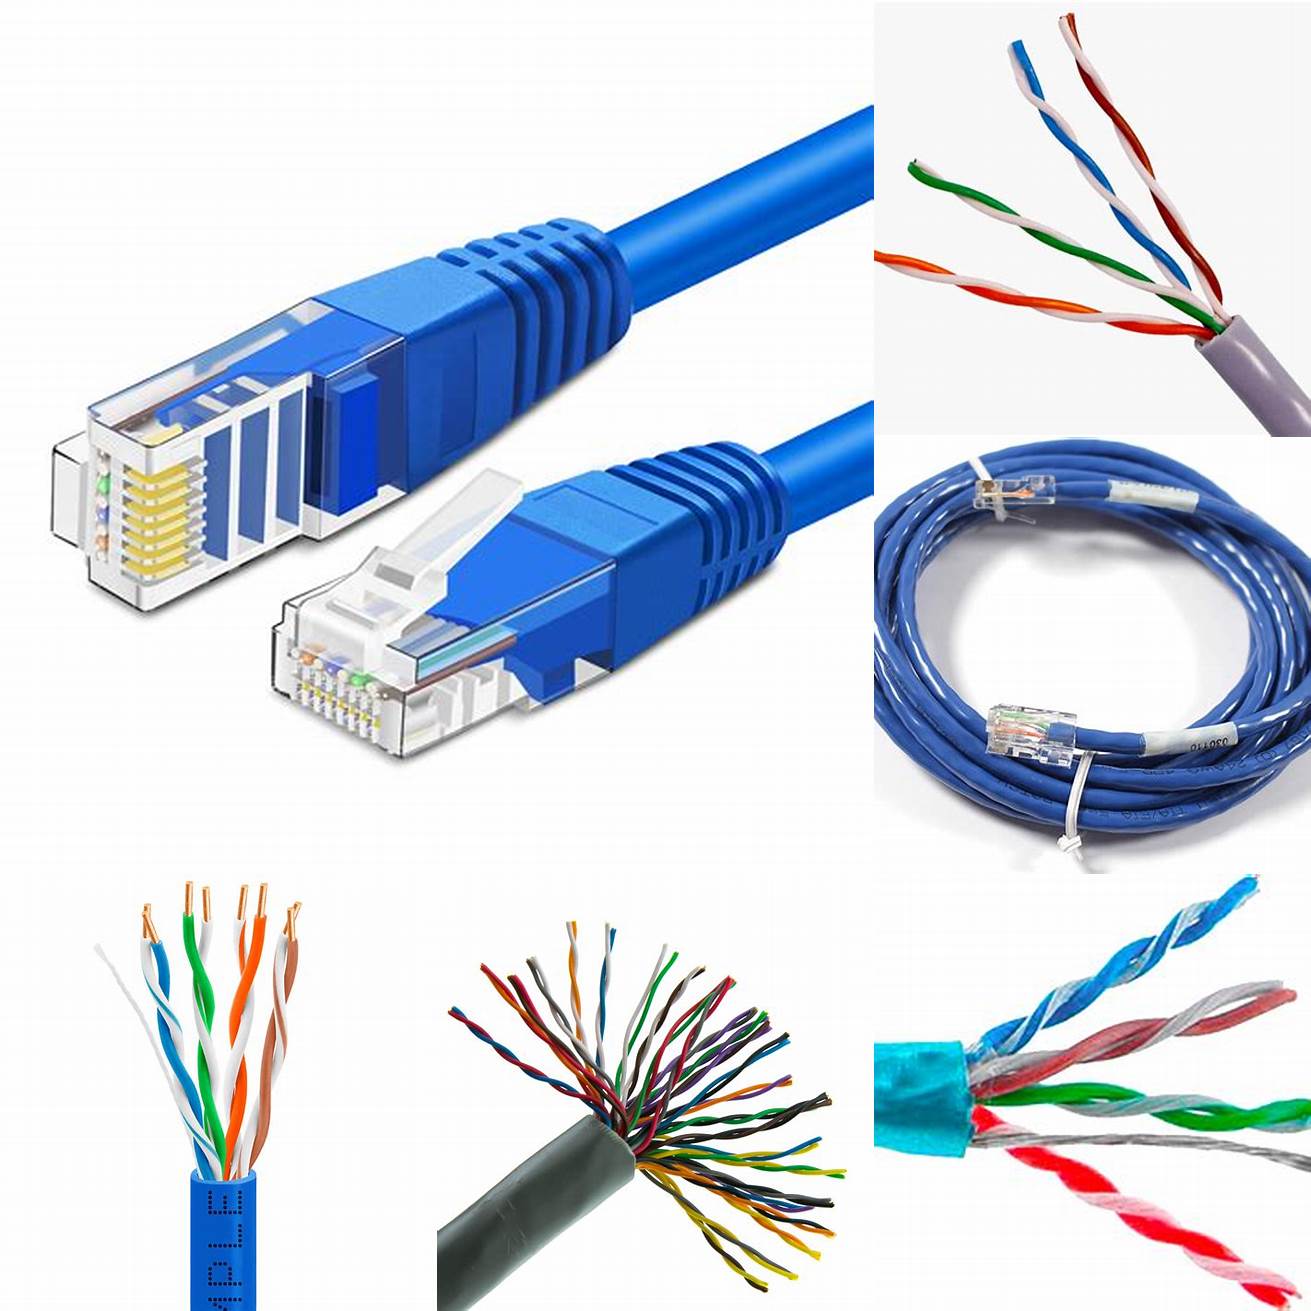 Image of Cat 5 cable